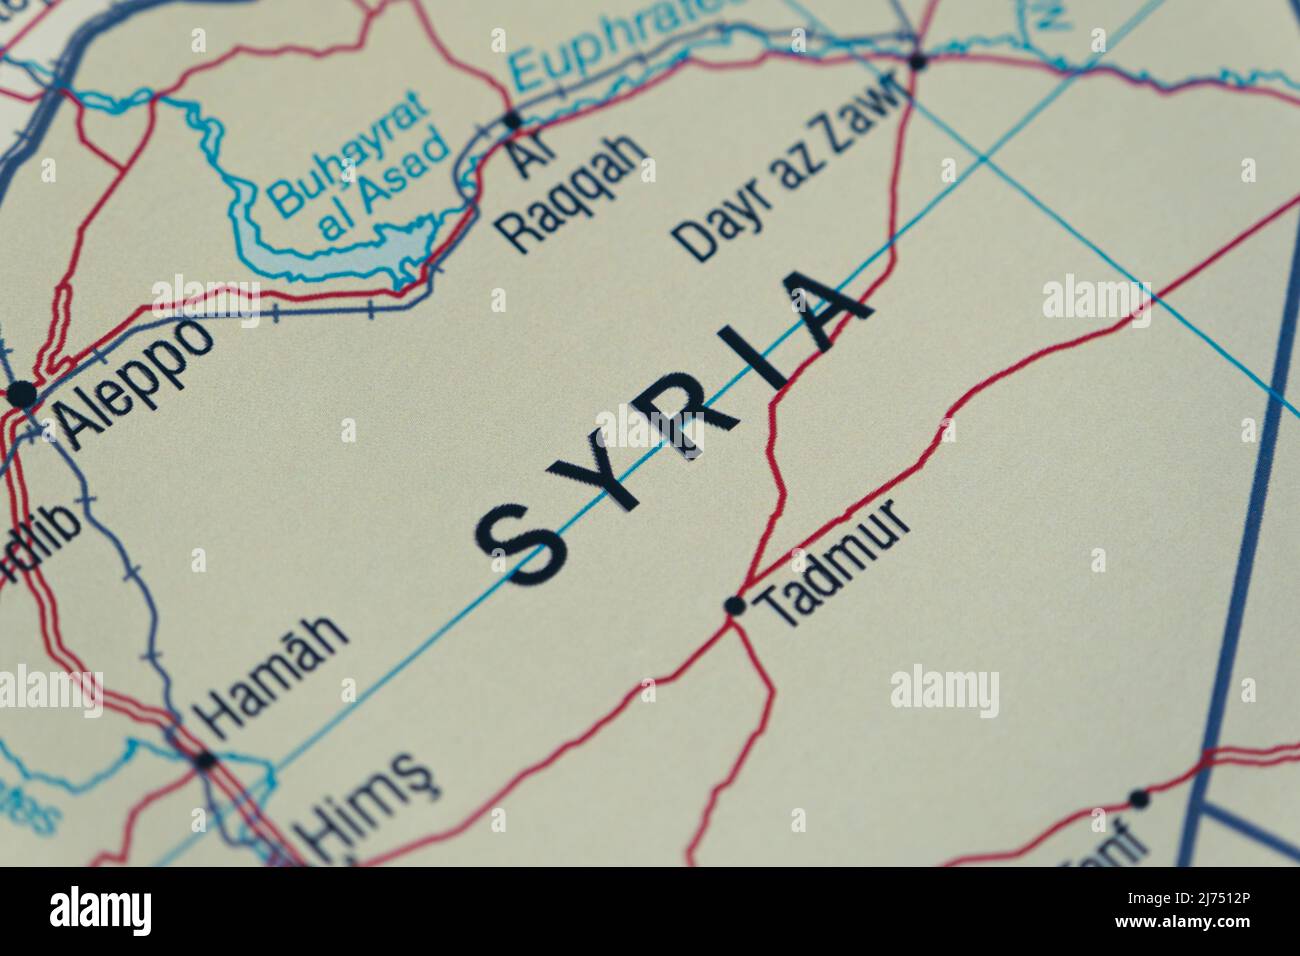 Syria country and location on map, macro shot and close-up of Syria on map, travel idea, vacation concept, Syrian culture, Middle East destination Stock Photo